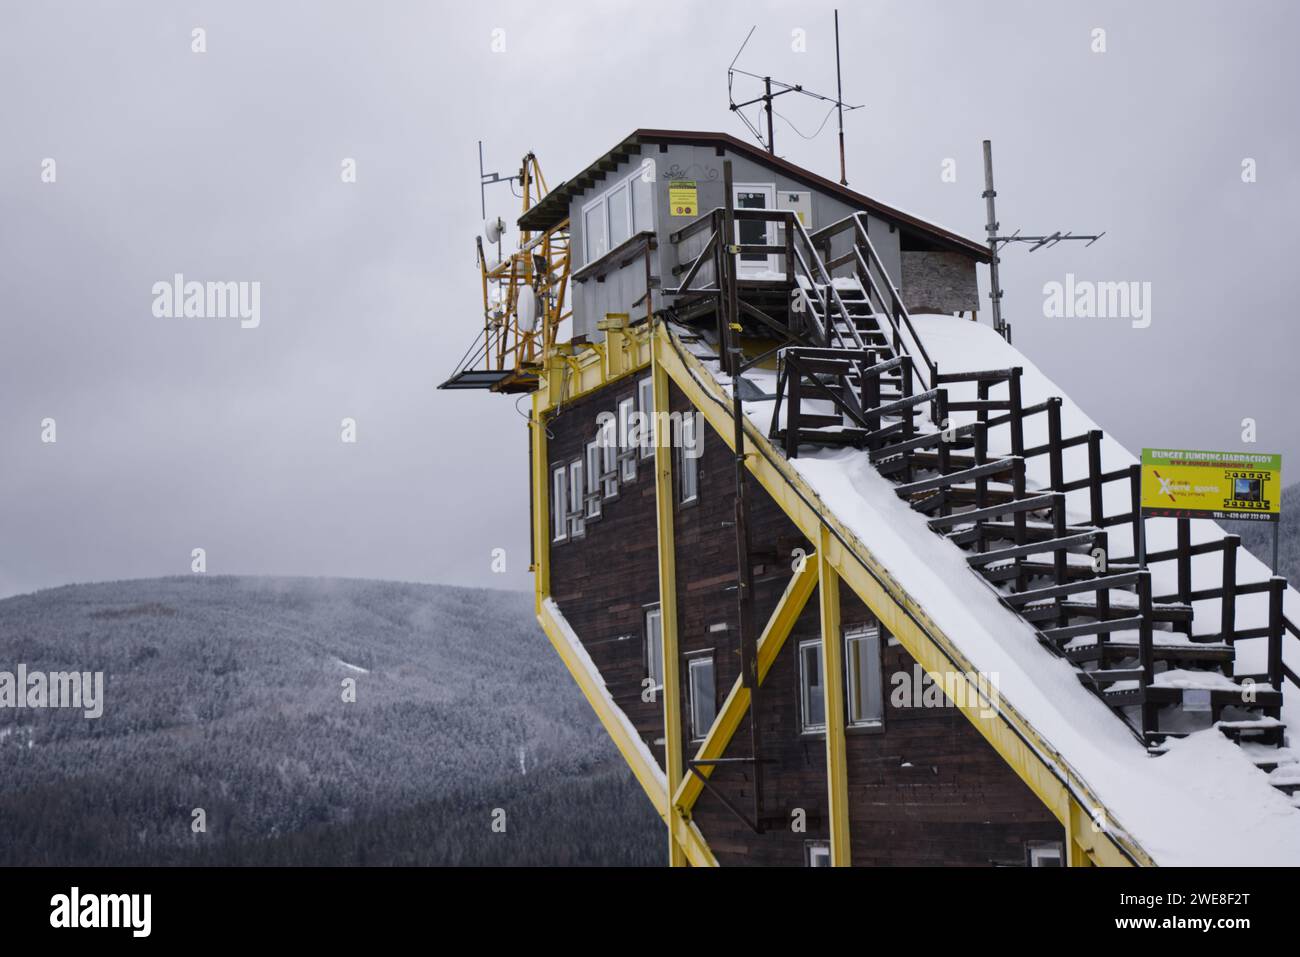 Abandoned mammoth ski jump in Harrachov, K180 is most unique platform in Harrachov, it is amongst 6 other platforms around the world with this size. Stock Photo